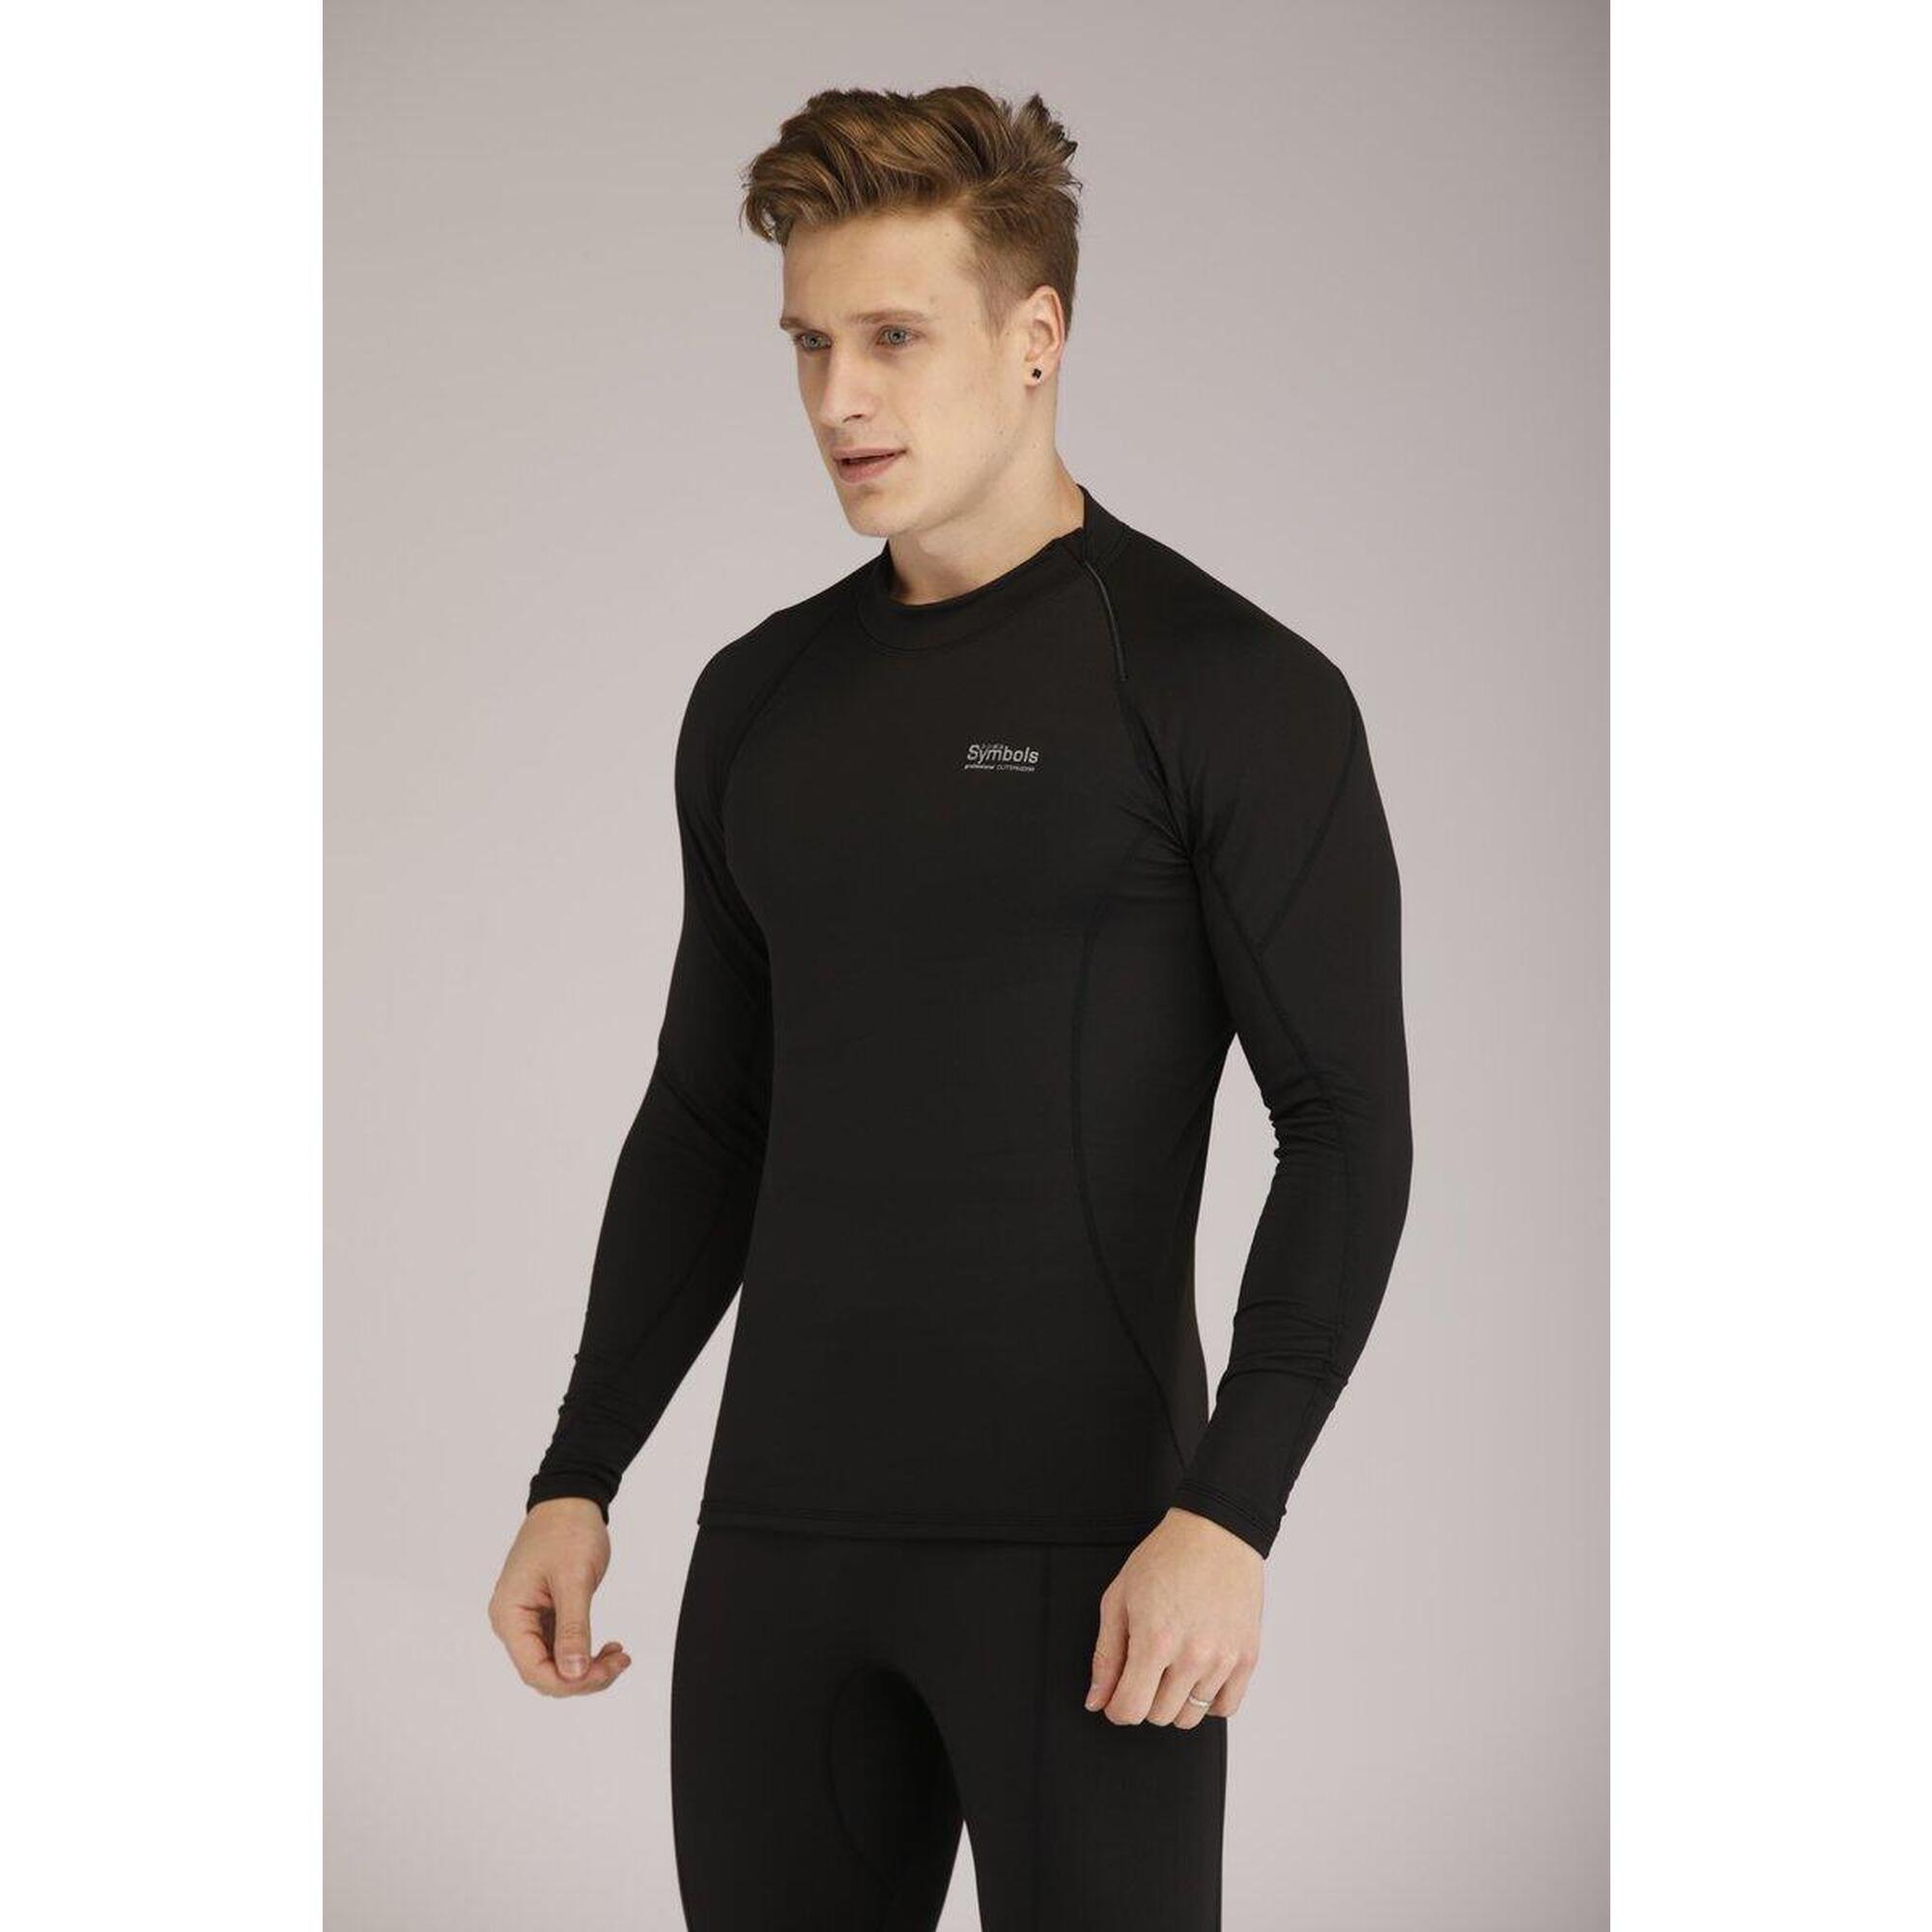 Adults 1.5mm Thick Thermal Fleece Top - BLACK